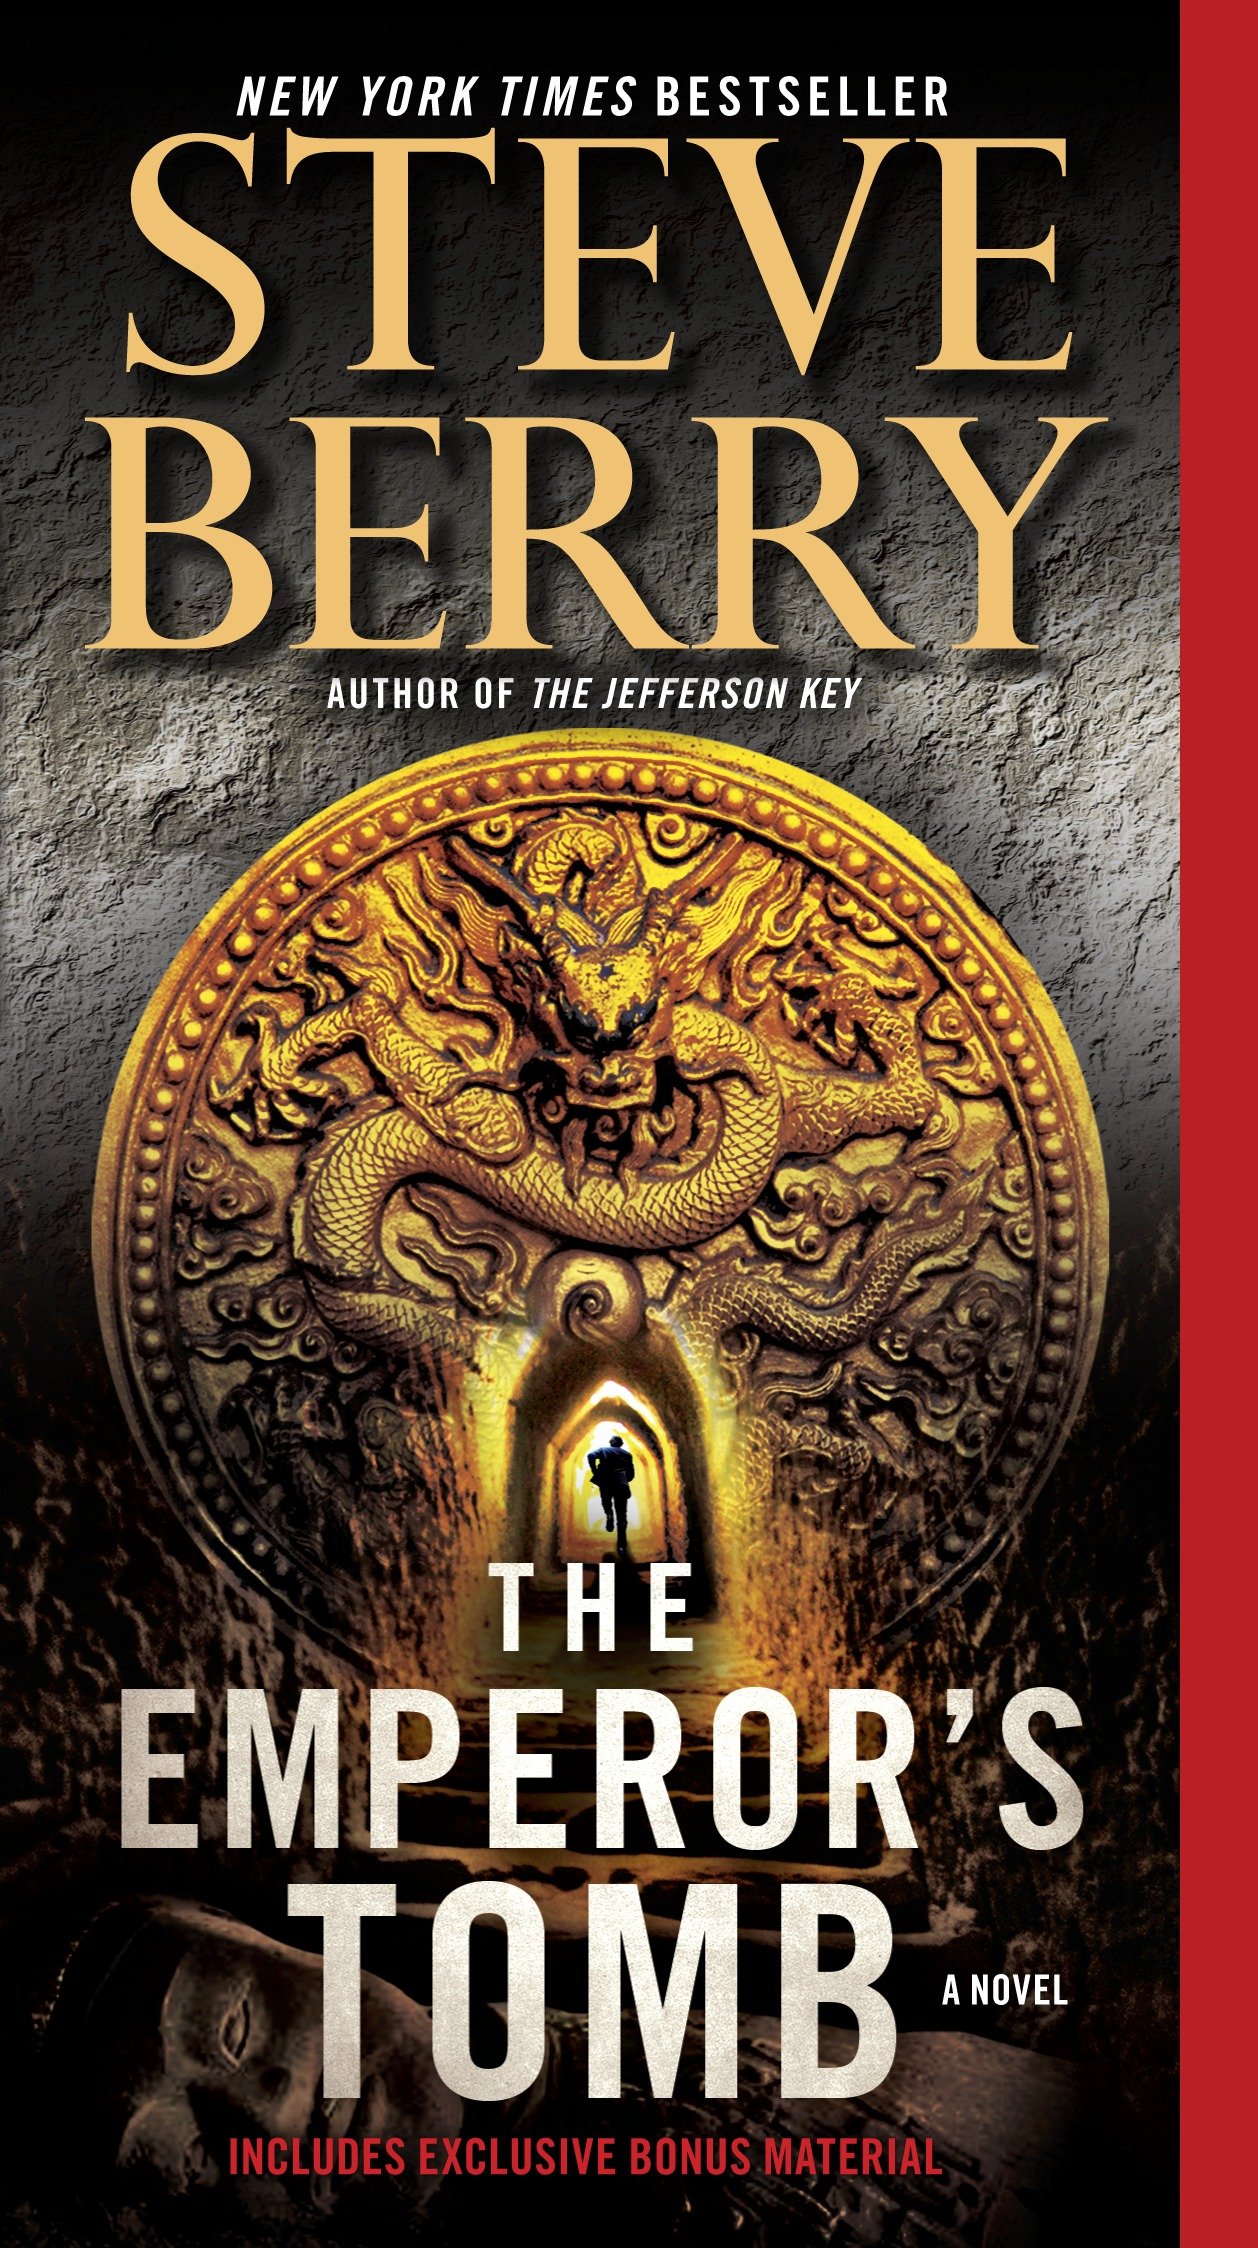 The Emperor's tomb cover image